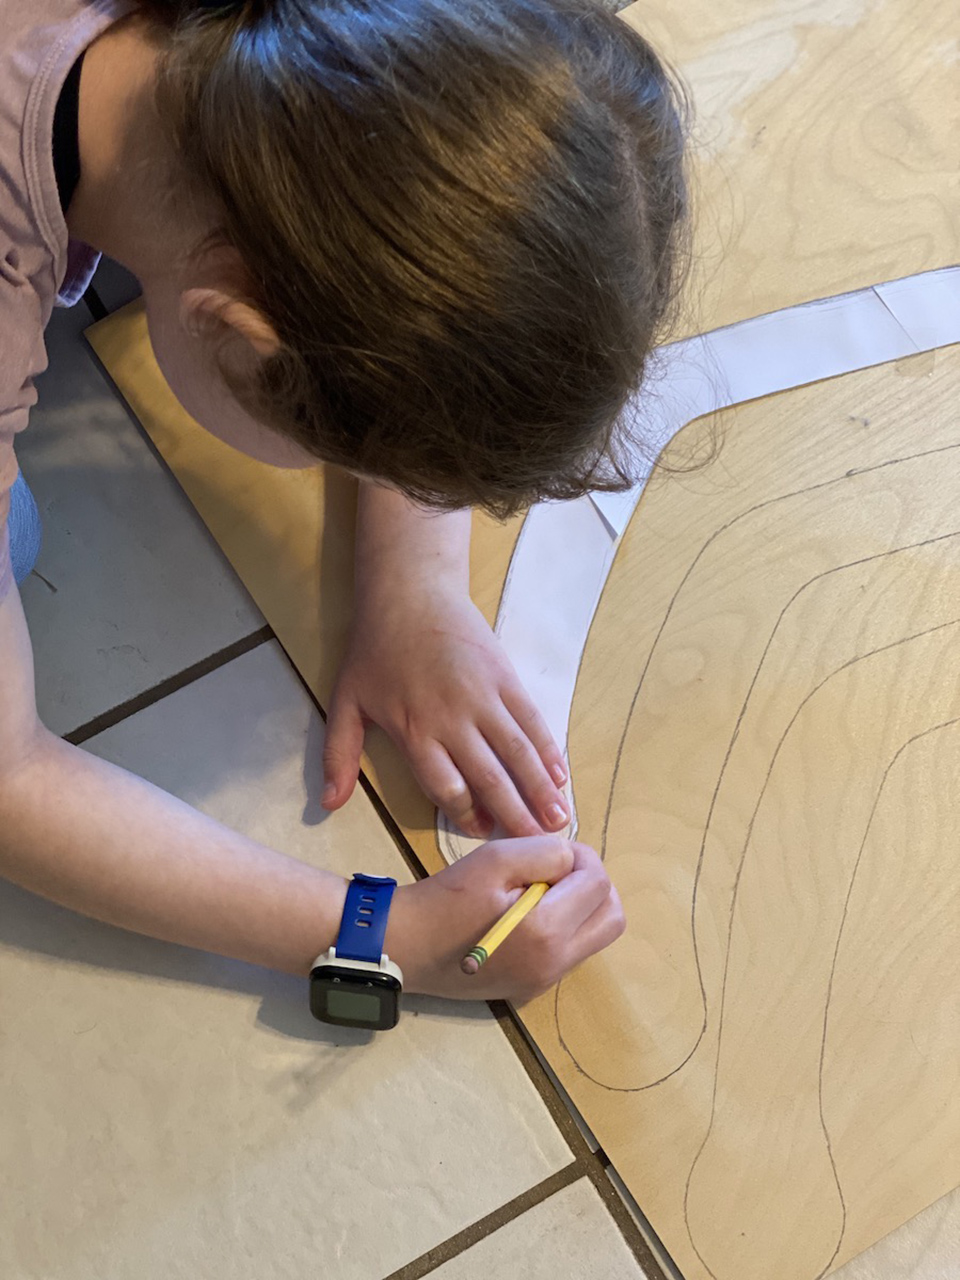 Anna traces her wing template onto plywood